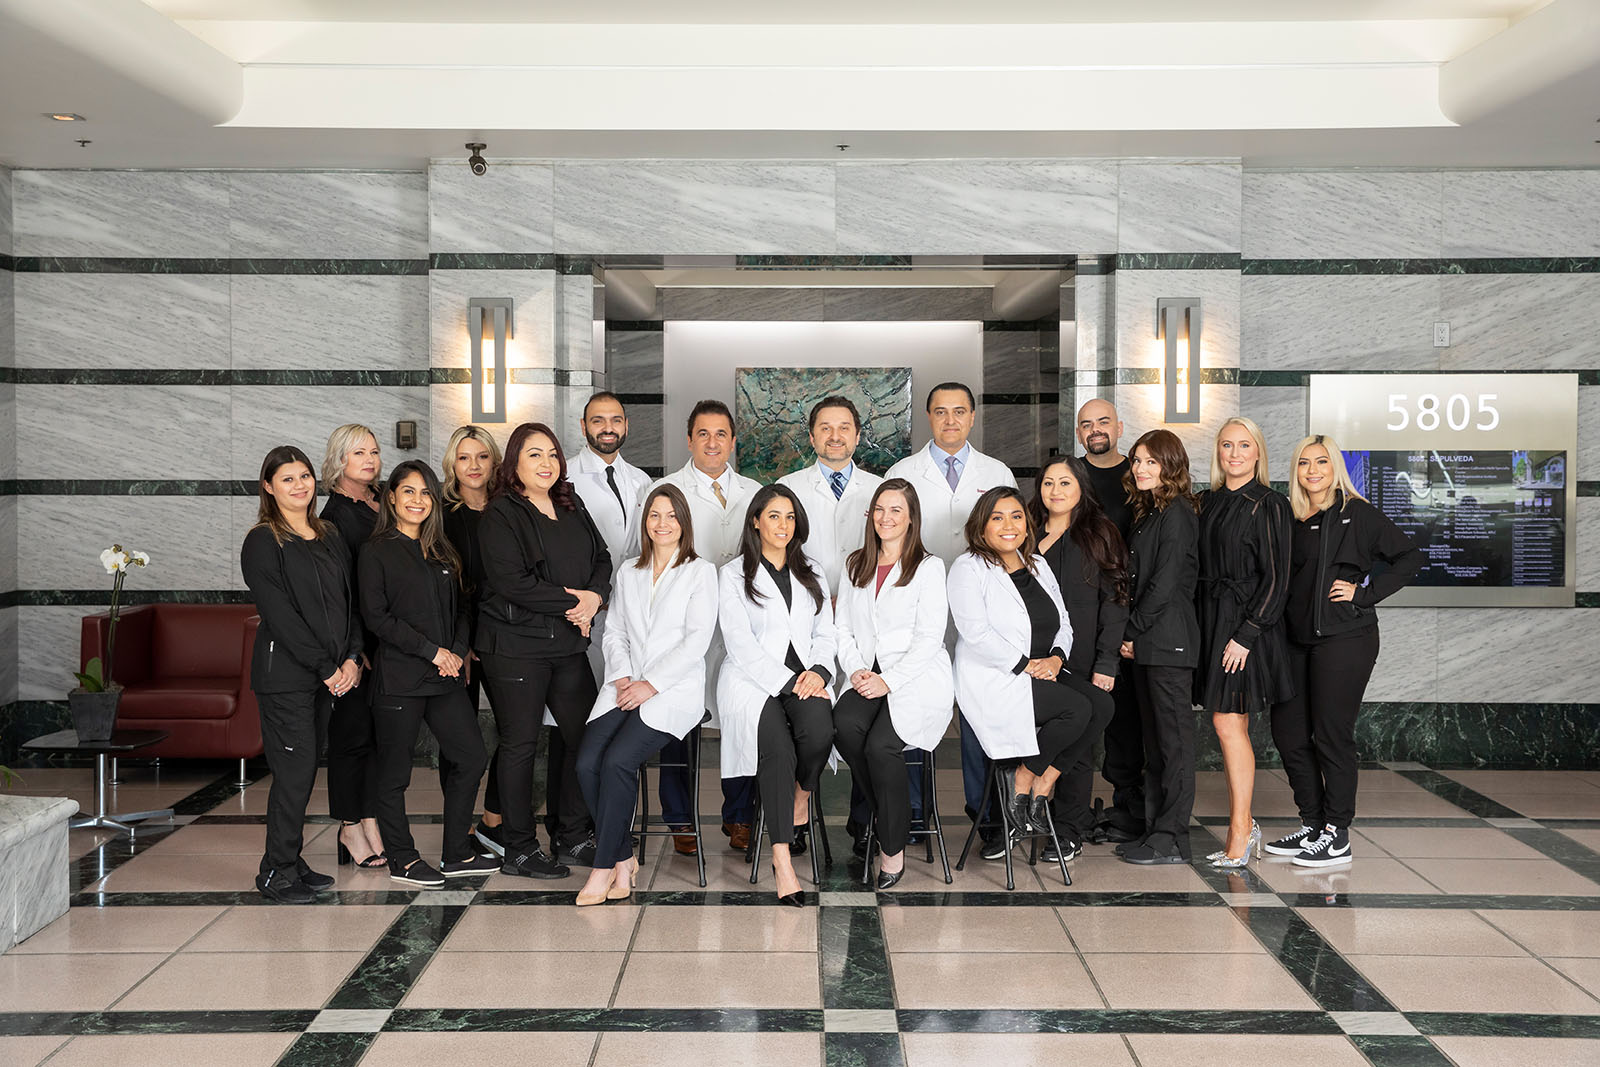 The whole team at SCMSC serving Los Angeles